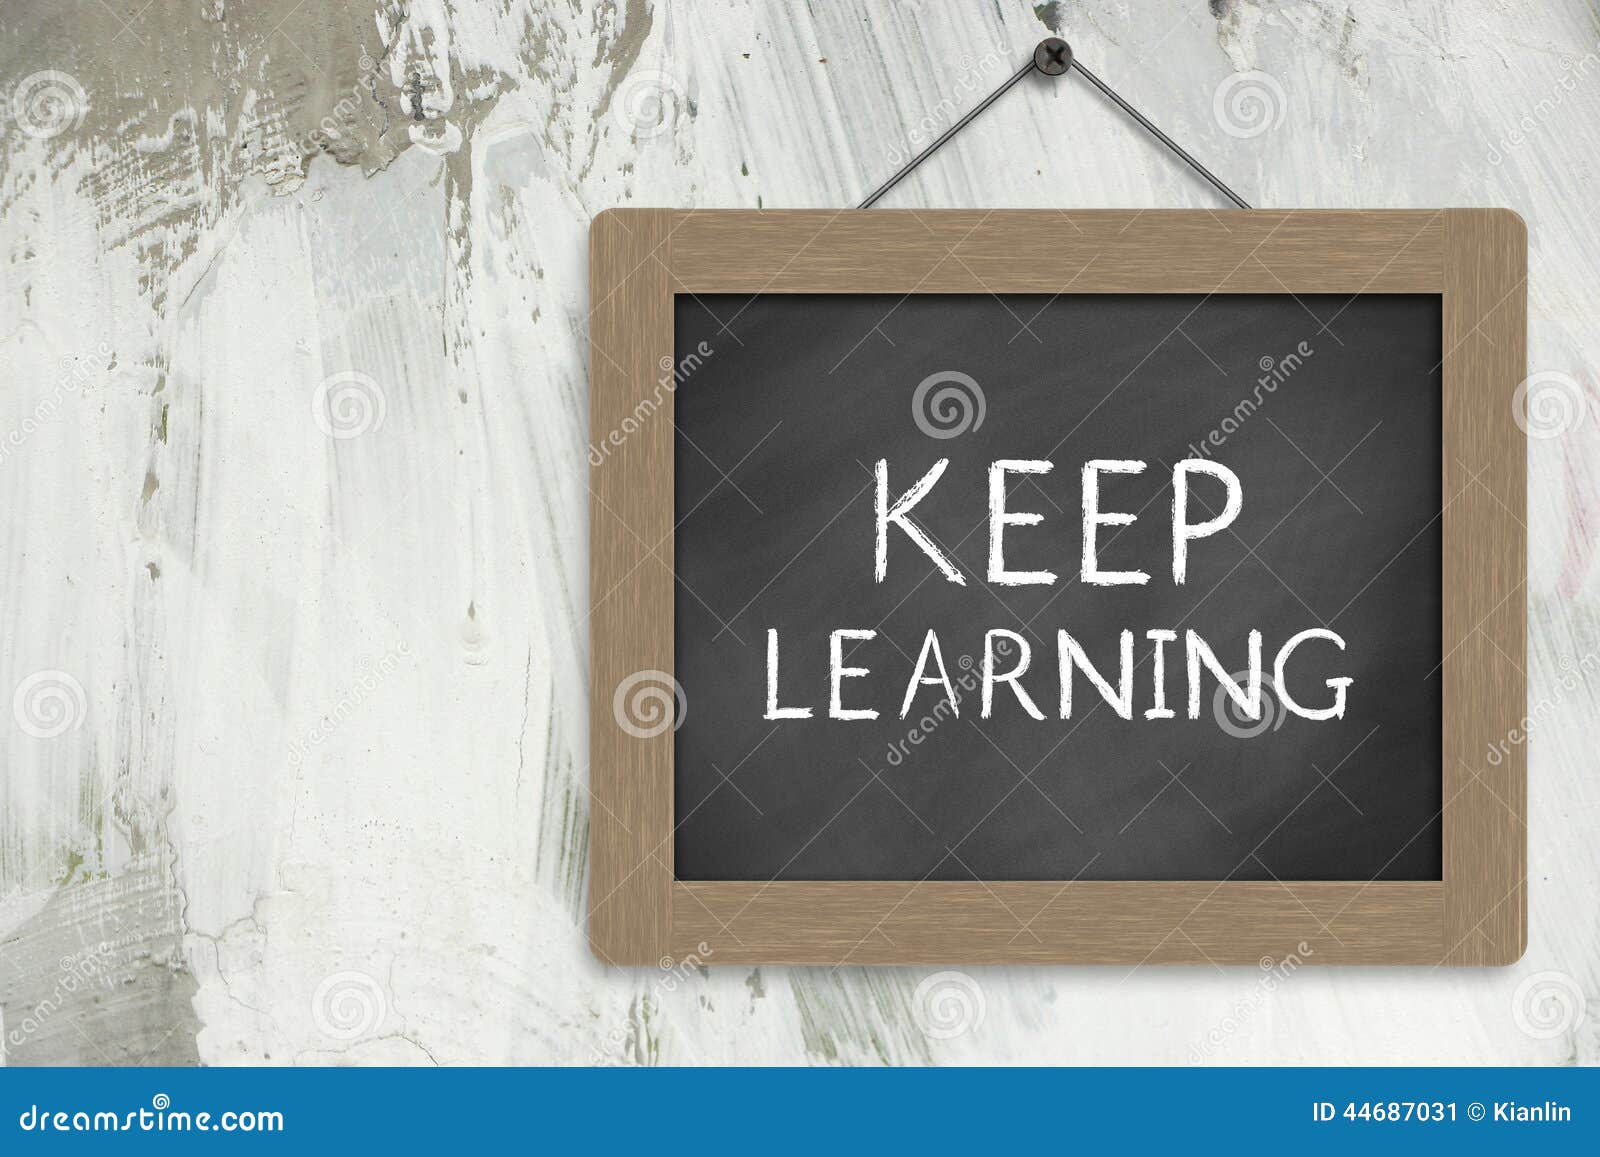 keep learning sign